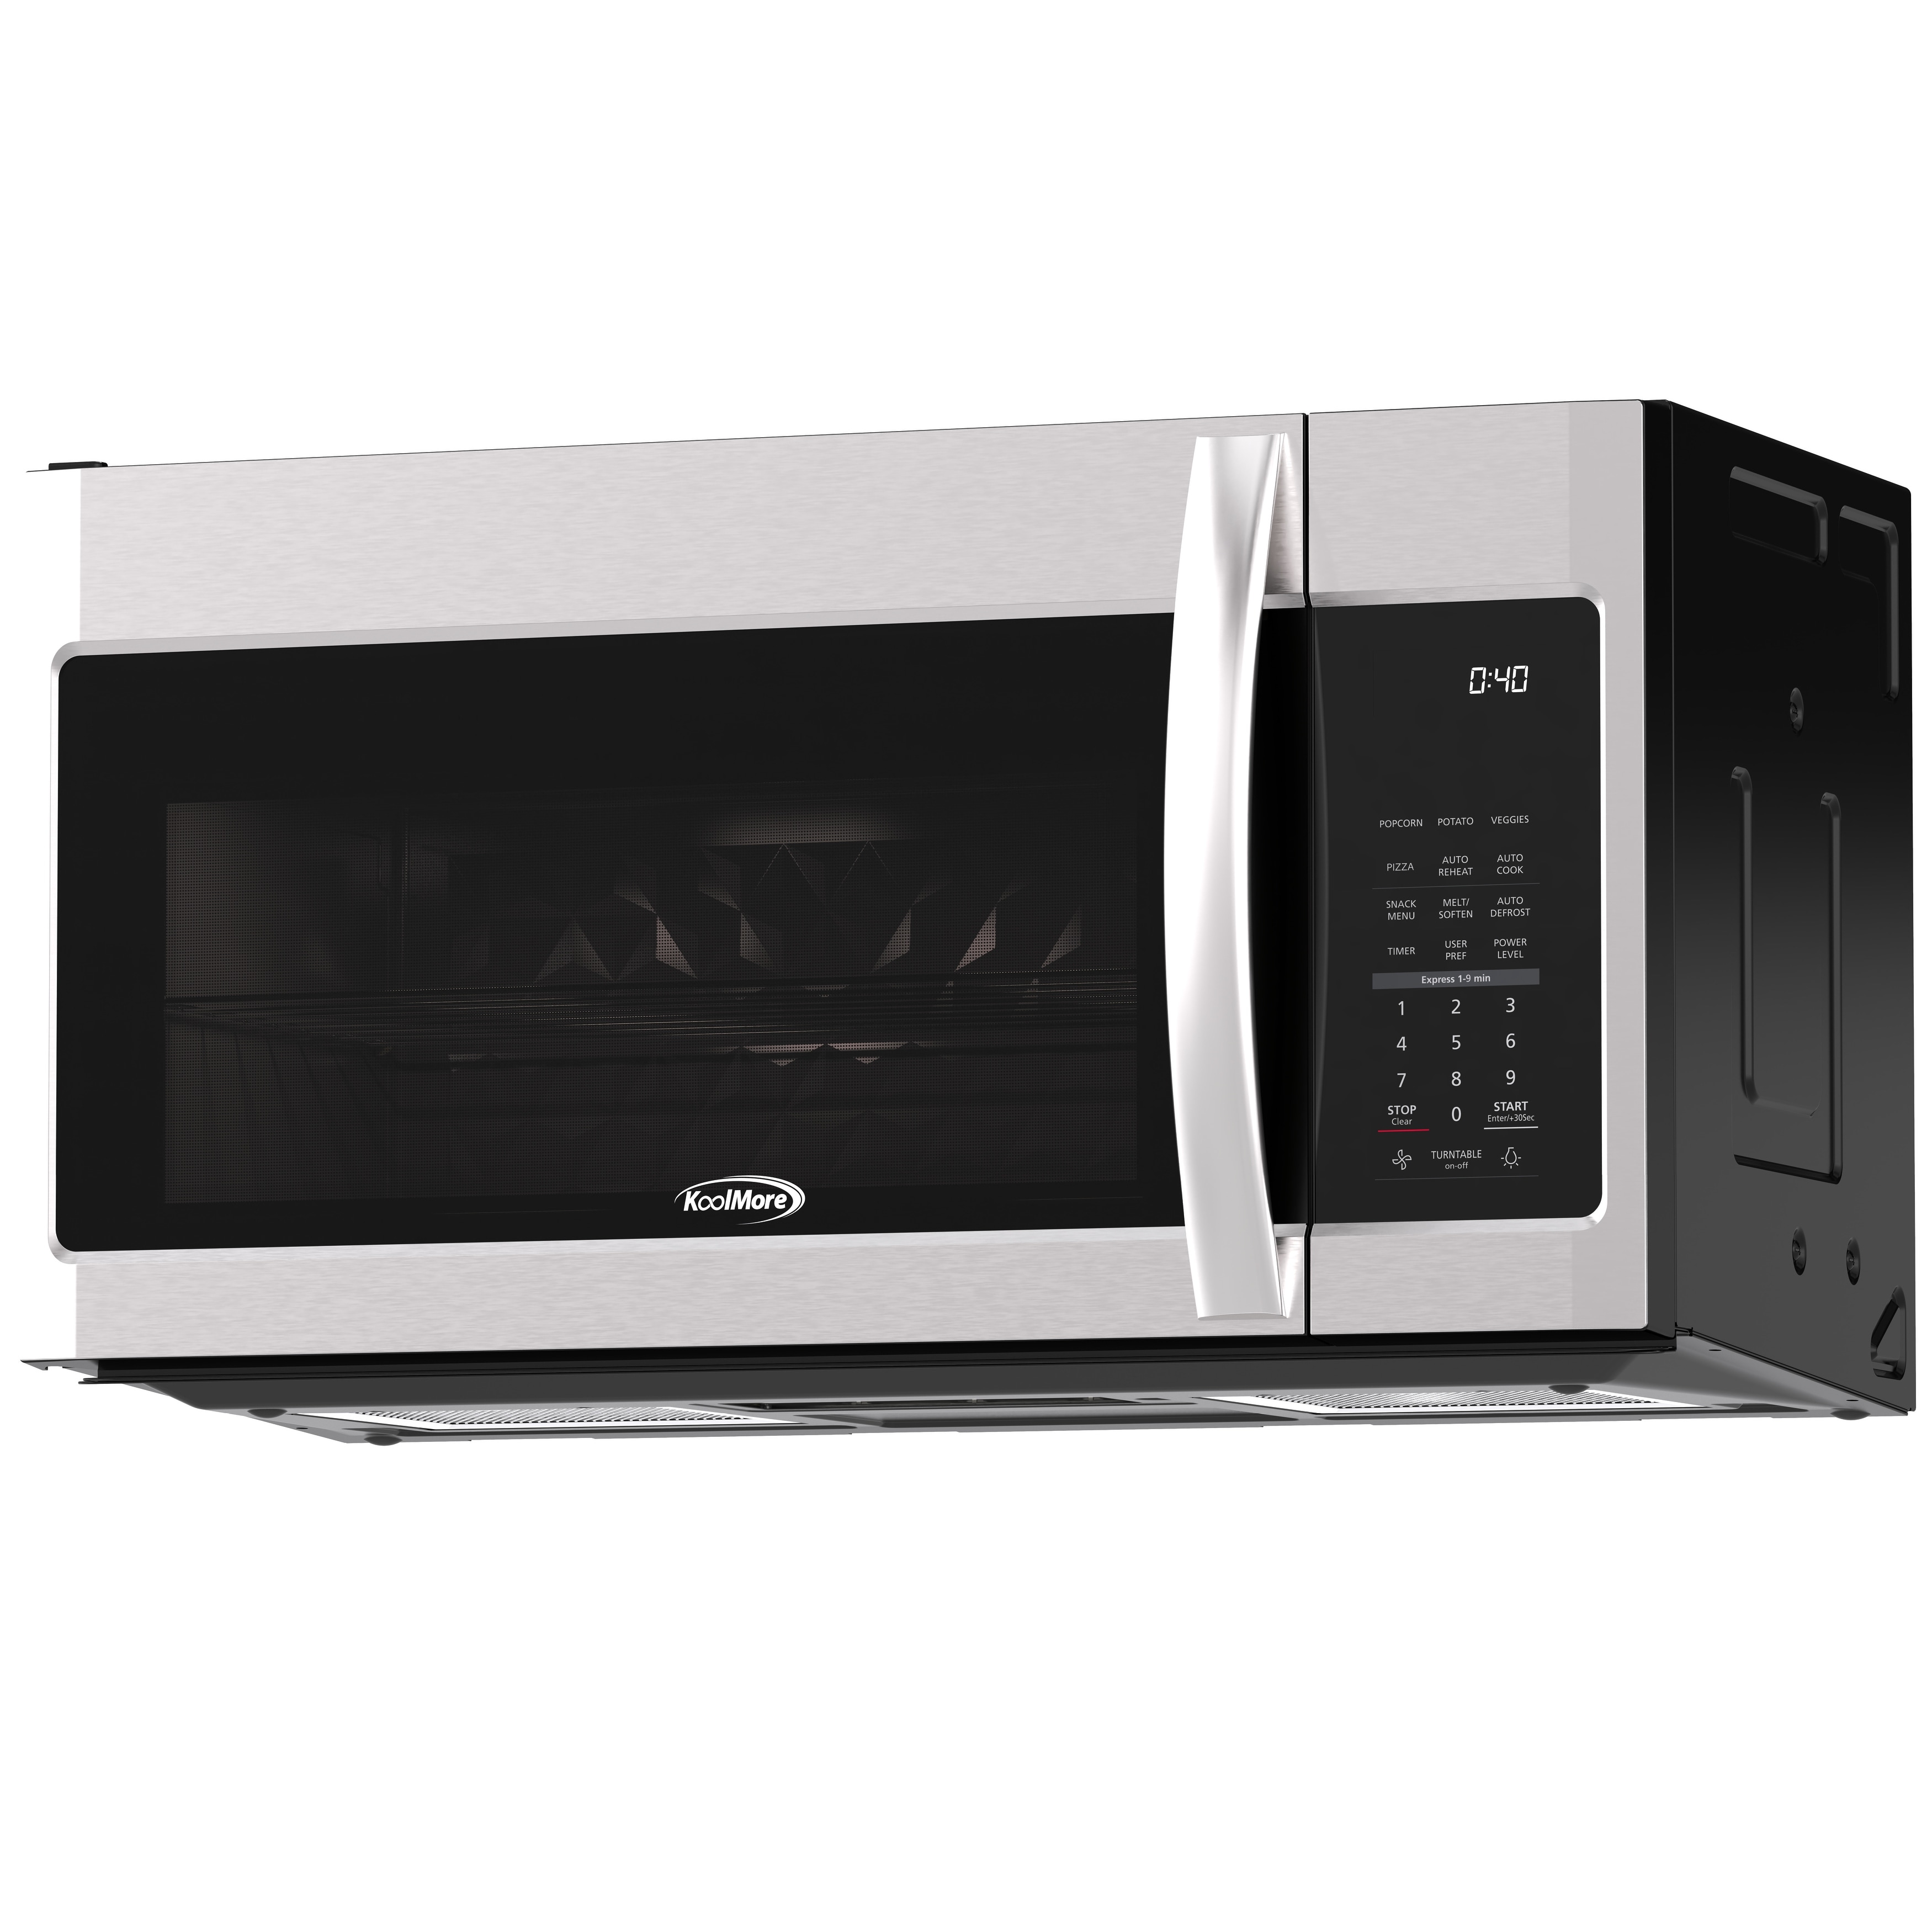 Oster Compact-Size 0.7-Cu. Ft. 700W Countertop Microwave Oven with  Stainless Steel Door Trim and Express Cook 